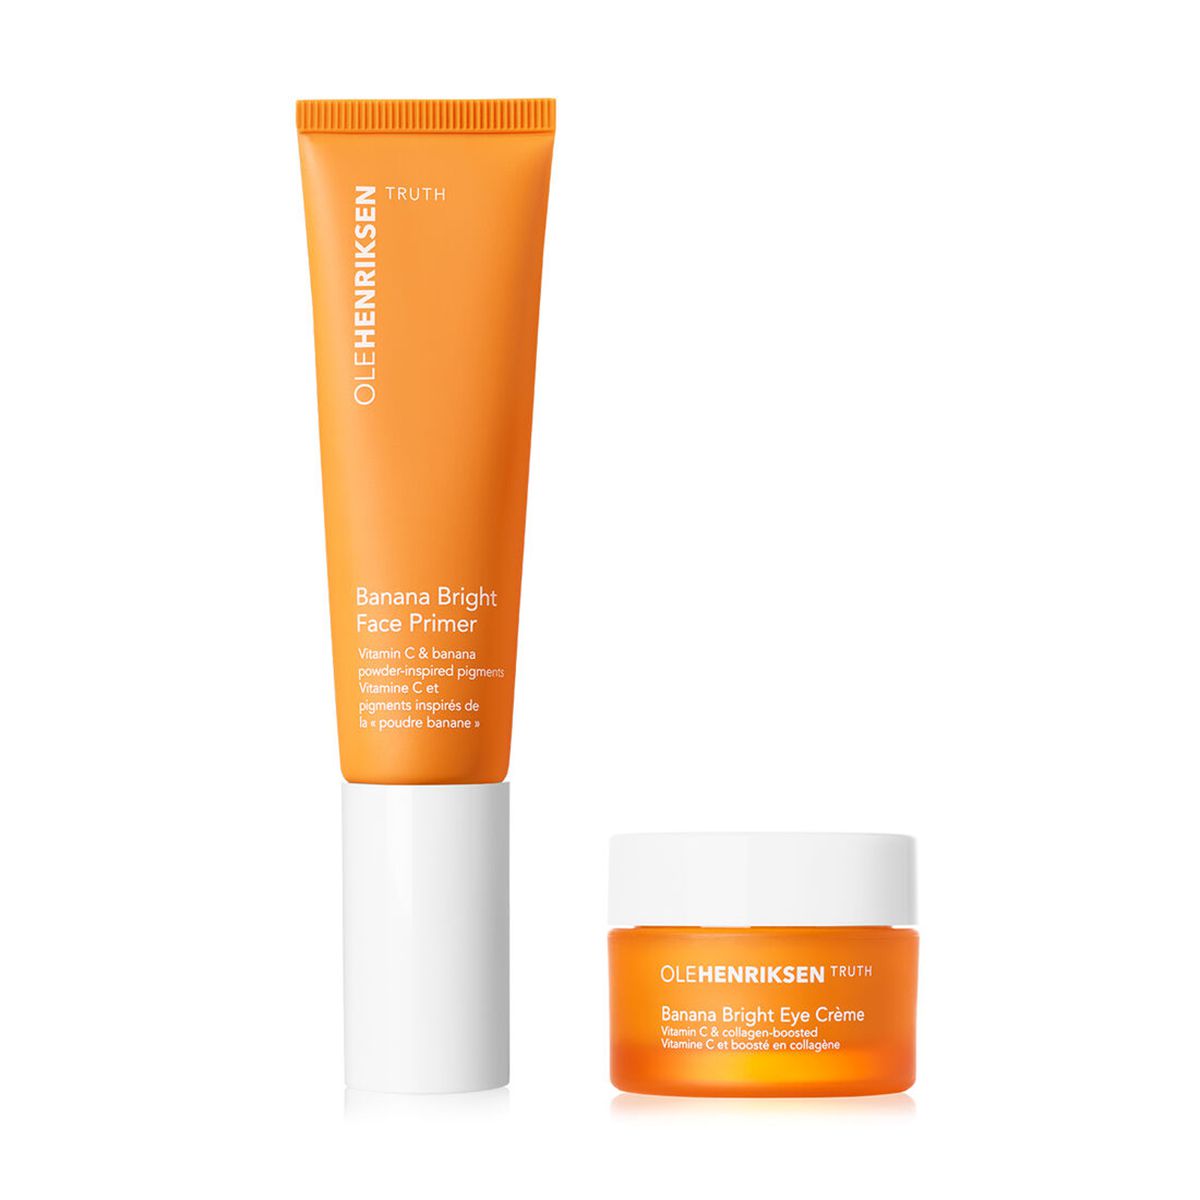 Ole Henriksen’s Glow From Home Vitamin C Duo